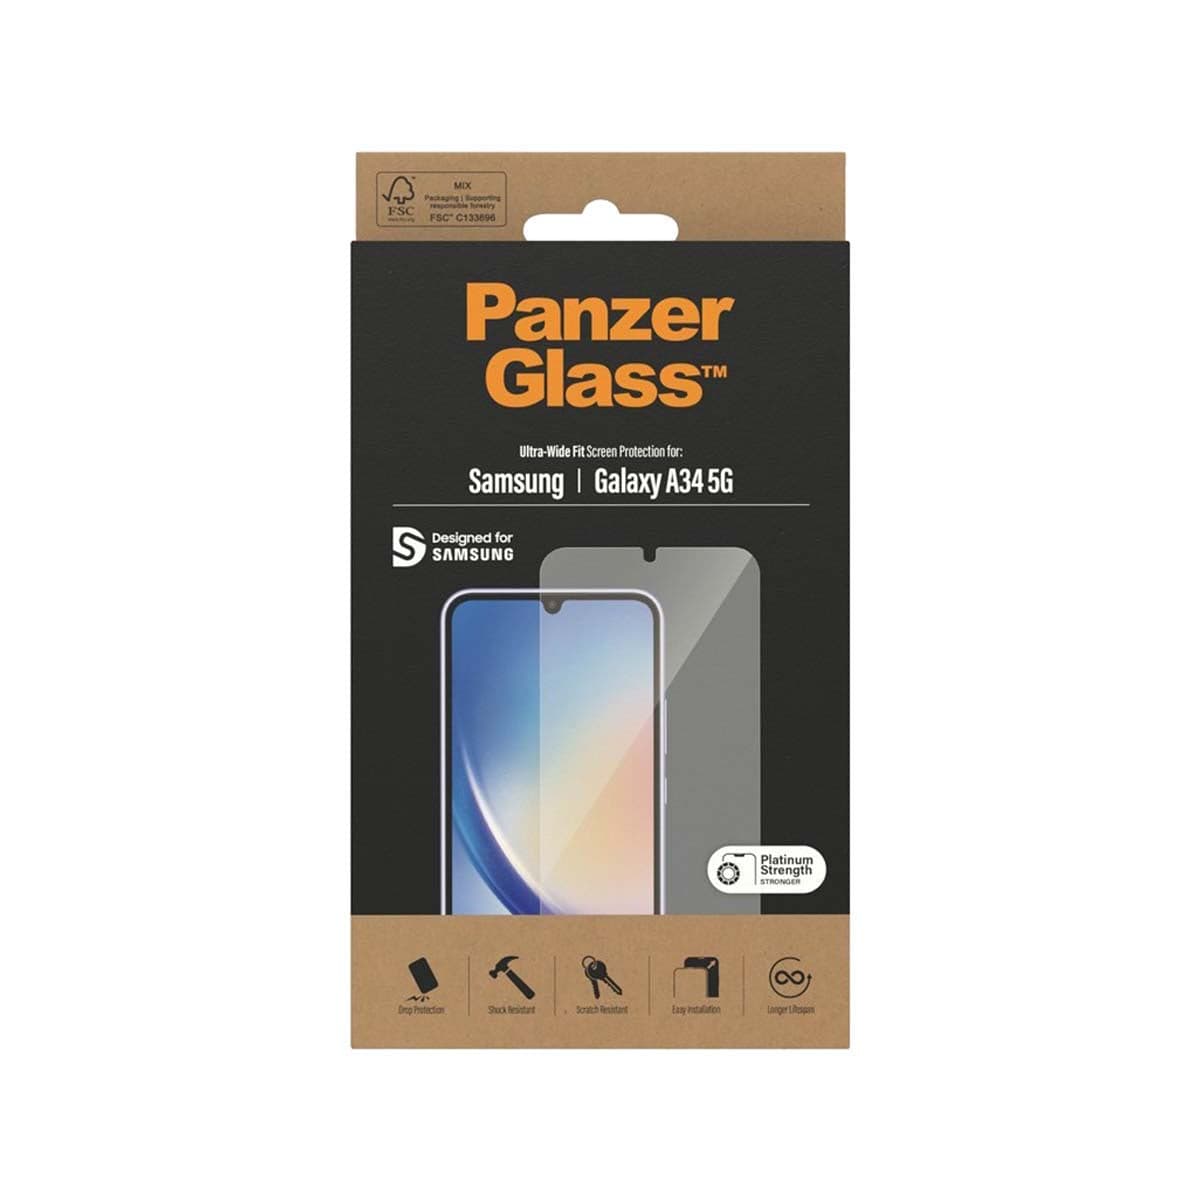 PanzerGlass Ultra-Wide Fit Phone Screen Protector for Samsung A34 5G - Clear.